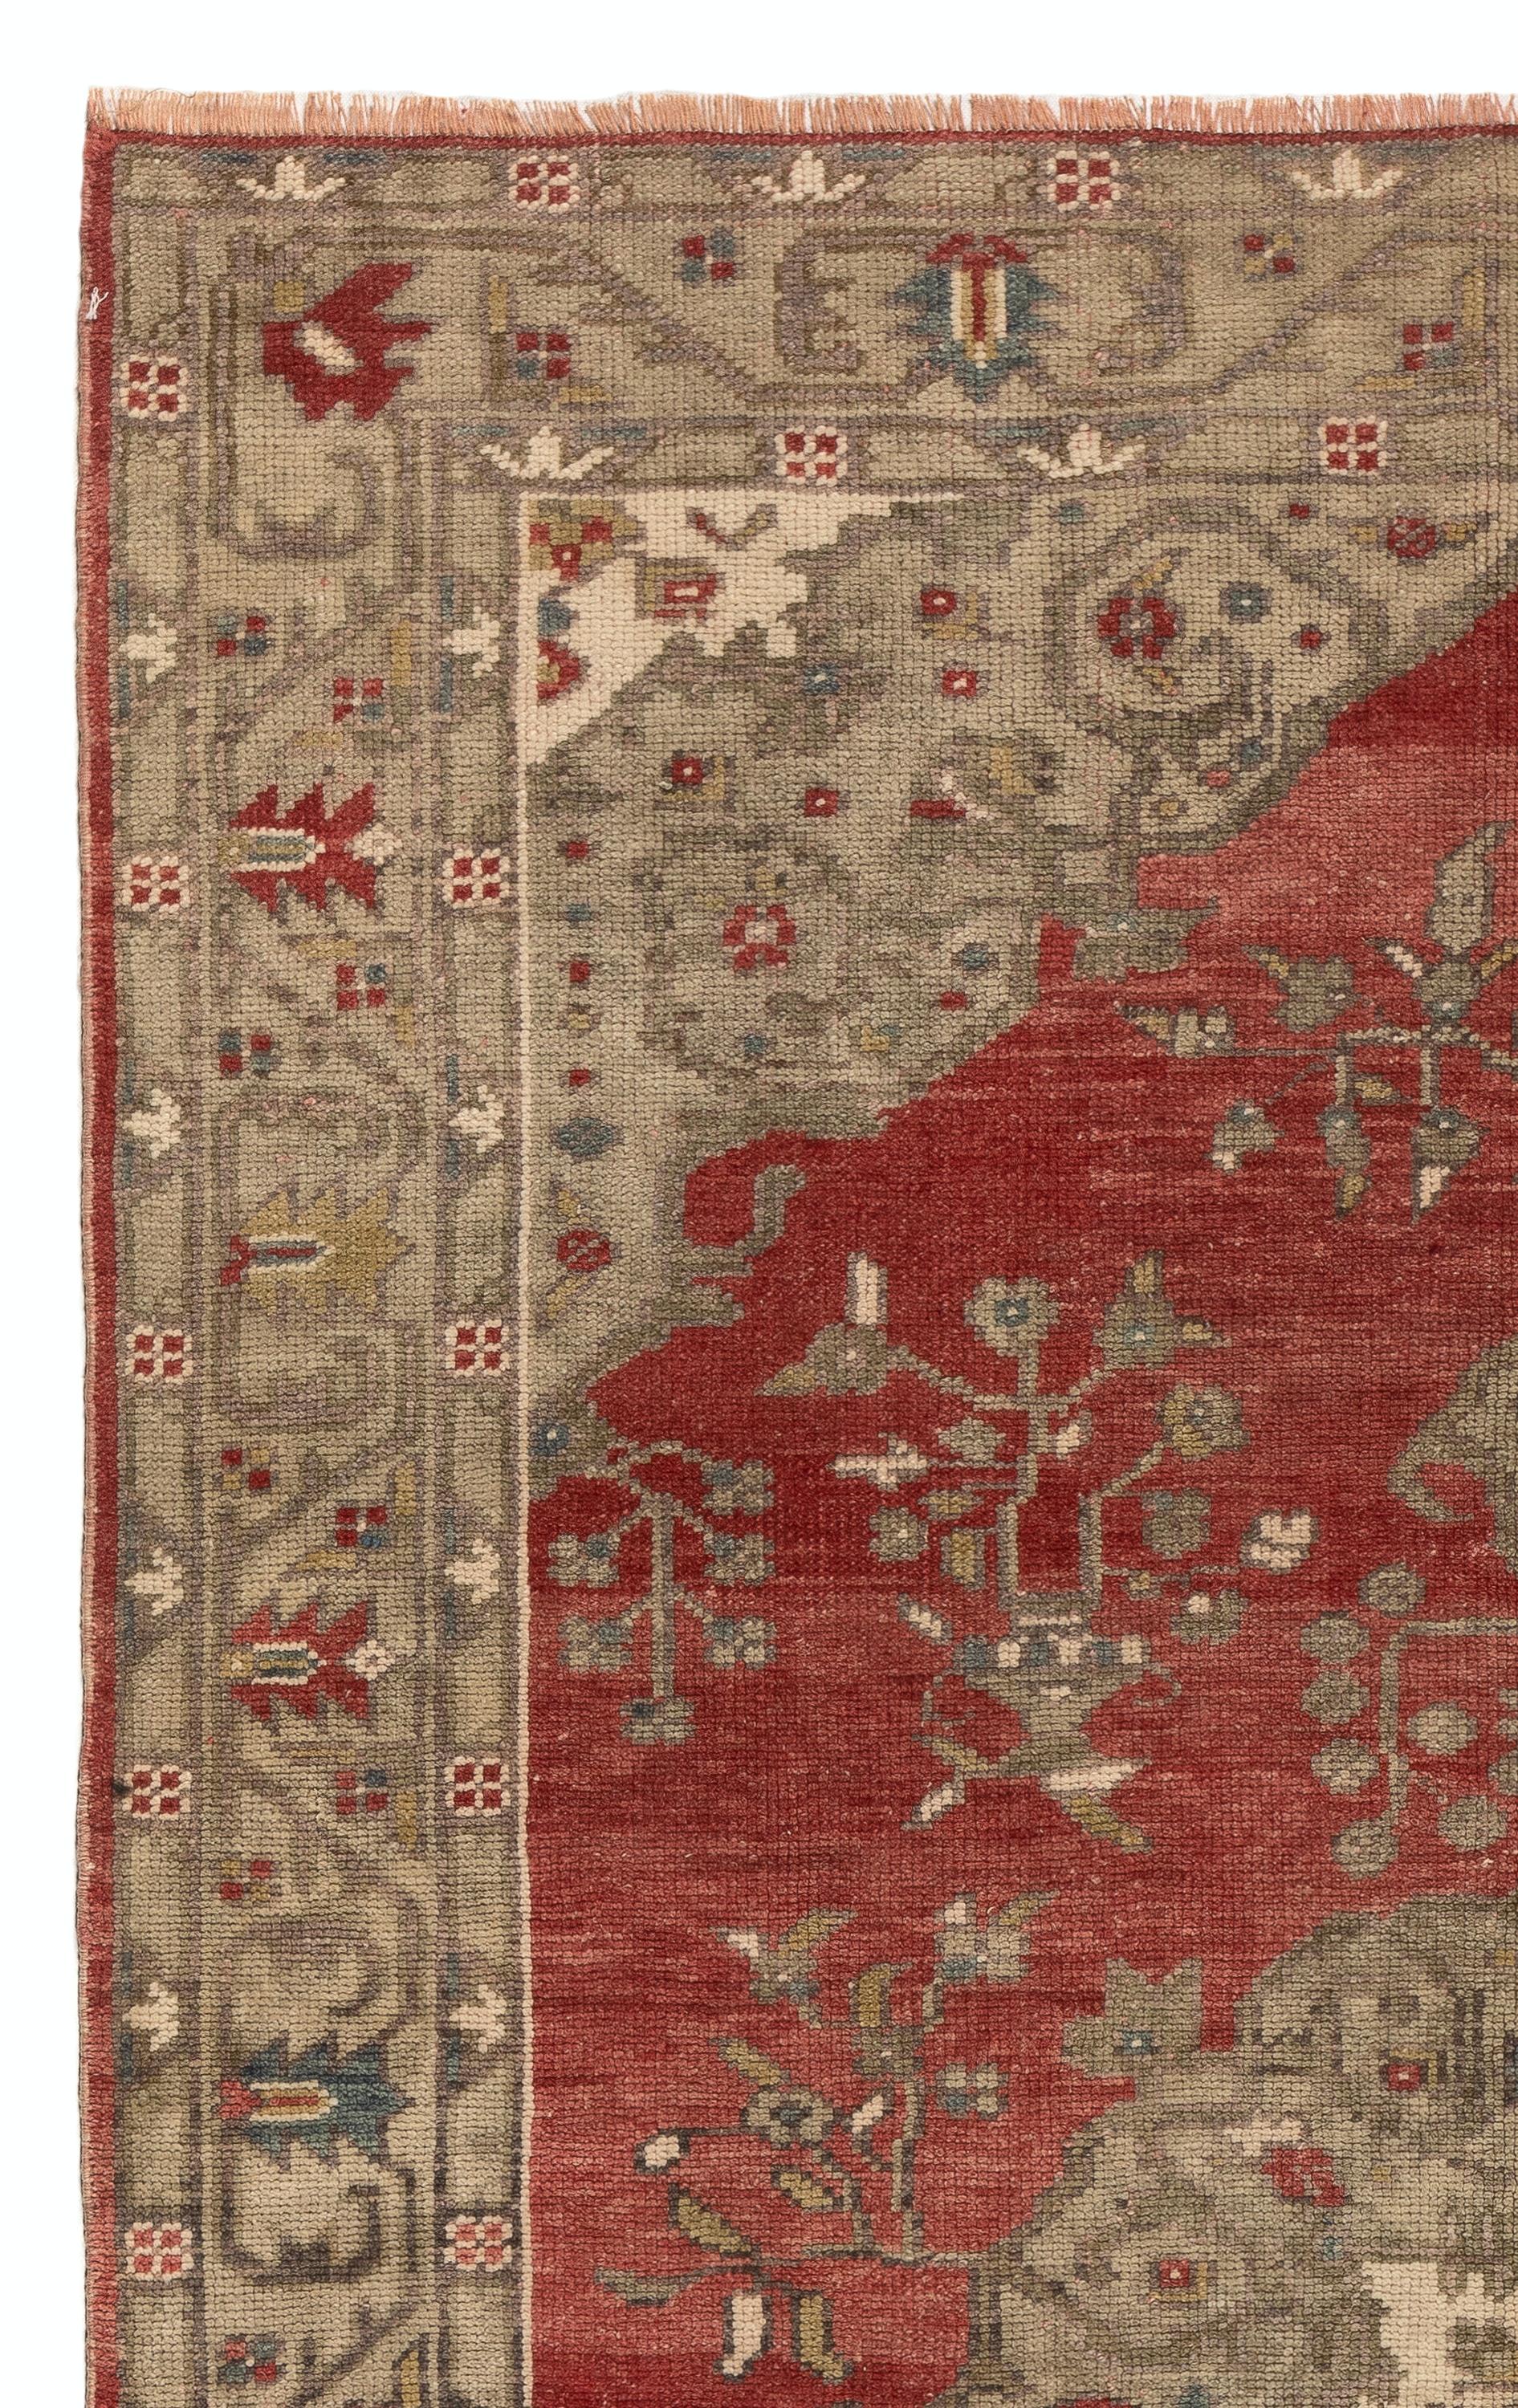 An antique hand-knotted Turkish 'Bergama' rug from West Anatolia made in the 1920s with soft medium wool pile. It features a large central medallion in stone beige color against a vermilion red field. Stylized floral bouquets in vases decorate the